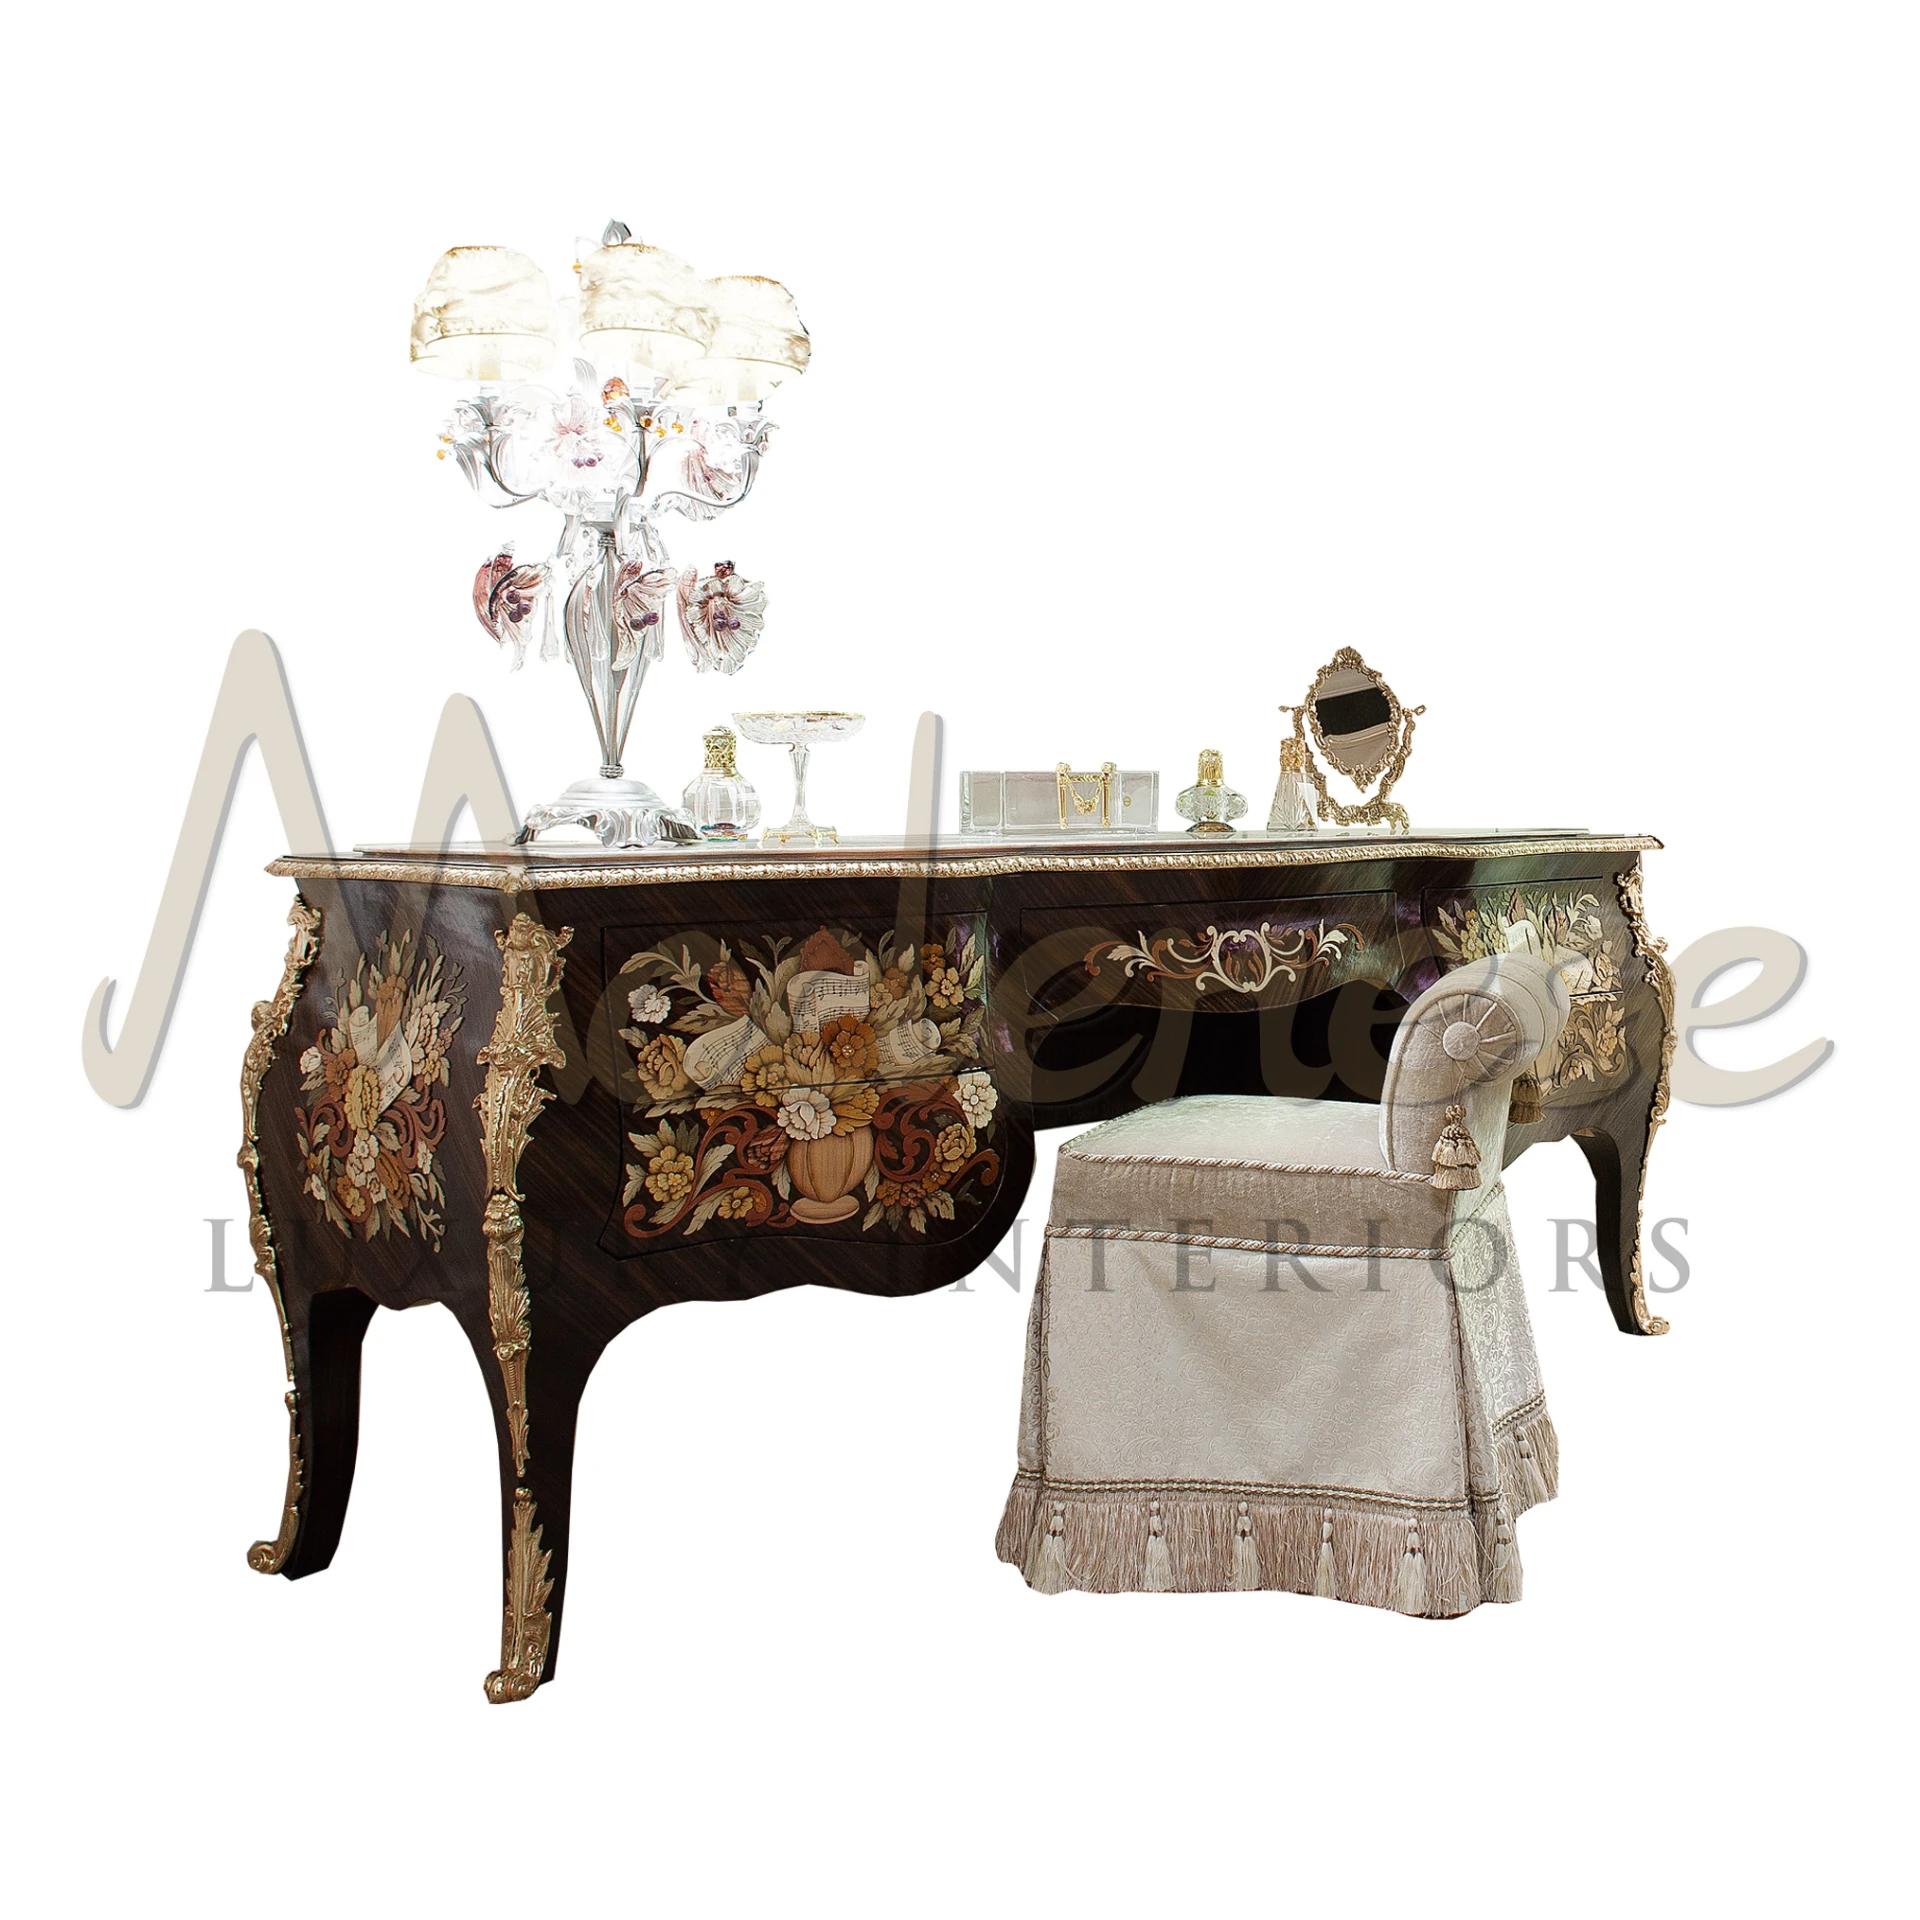 Ornate dark colored luxurious classical dressing table with carved details in a Baroque antique style created by Modenese Furniture Manufacturer in Italy